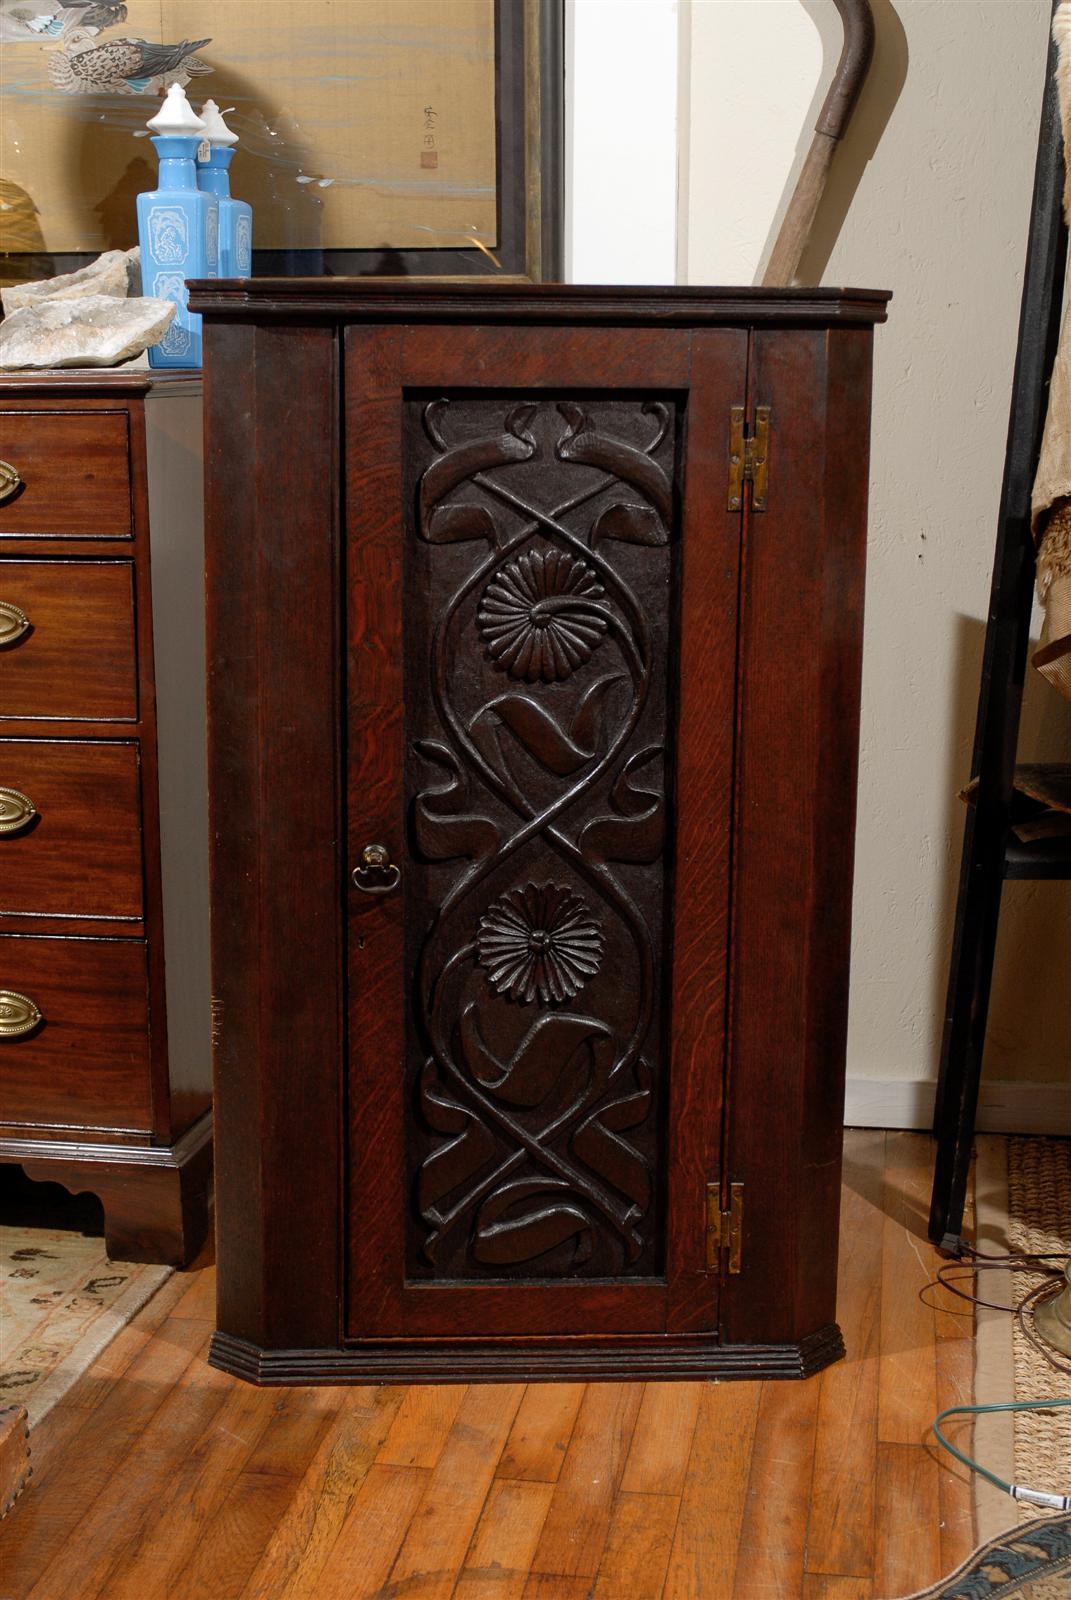 19th Century English hanging corner cabinet of oak with a molded crown above an inset door with a ribbon and floral carved panel hinged with brass hardware and flanked by canted corners and having molding along the base as well.  The cabinet is